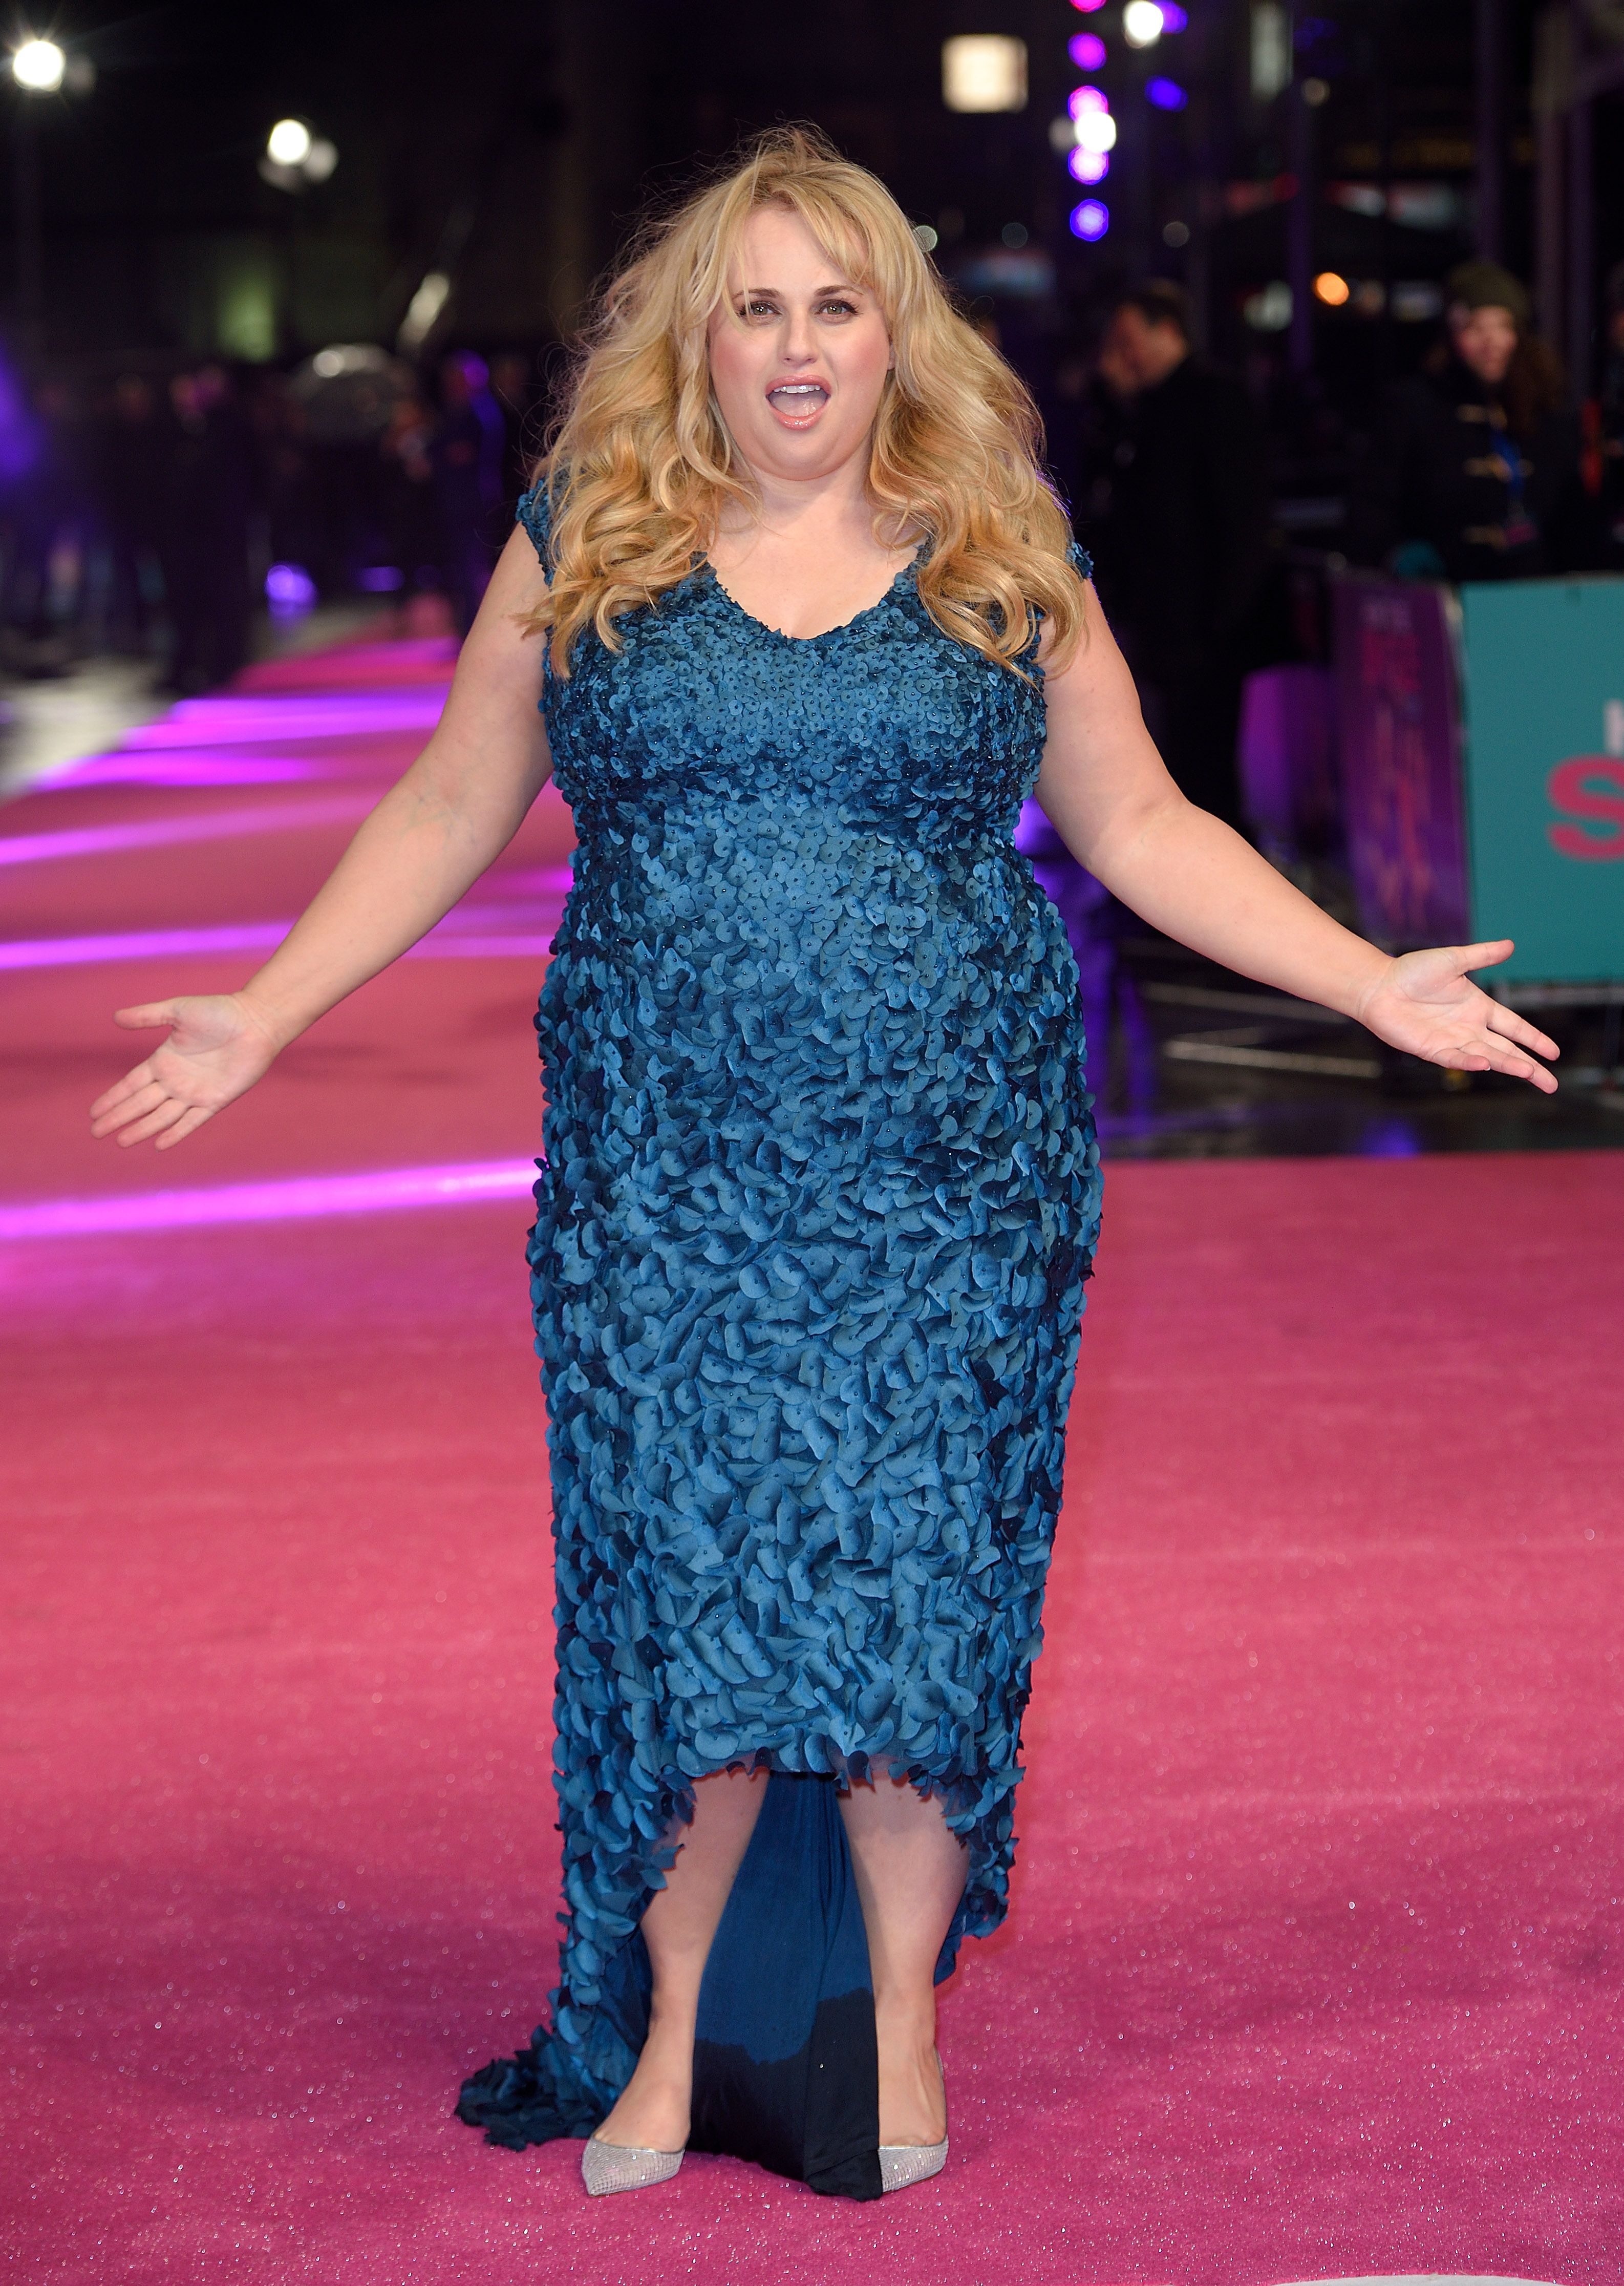 Rebel Wilson at the European Premiere of "How To Be Single" at the Vue West End on February 9, 2016, in London, United Kingdom | Photo: Karwai Tang/WireImage/Getty Images